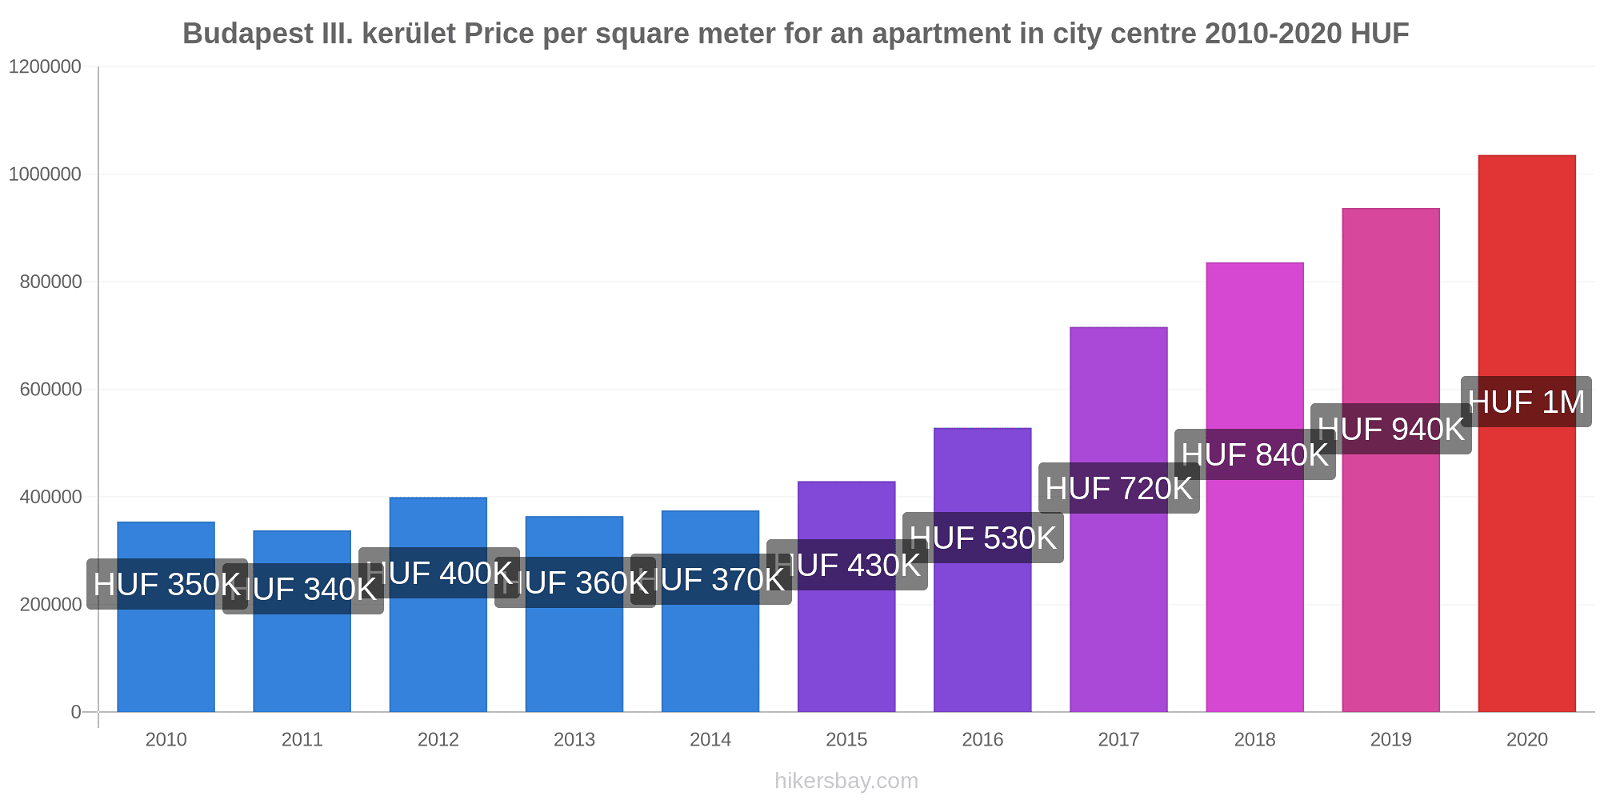 Budapest III. kerület price changes Price per square meter for an apartment in city centre hikersbay.com